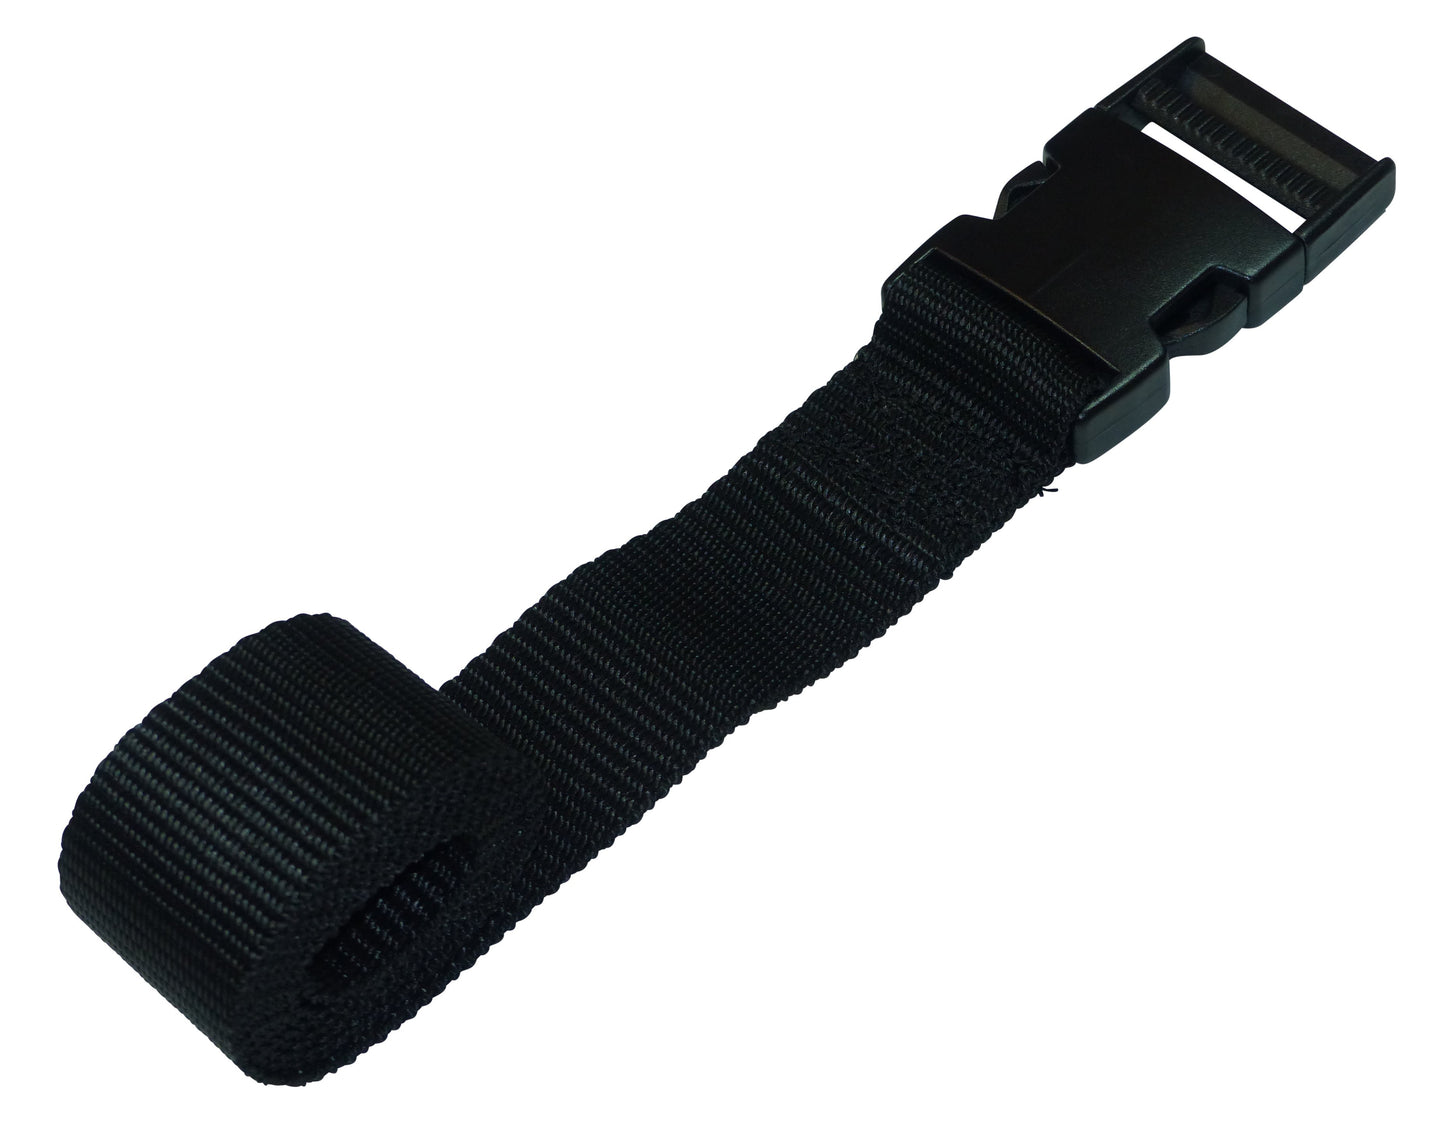 Benristraps 38mm Webbing Strap with Quick Release Buckle in black